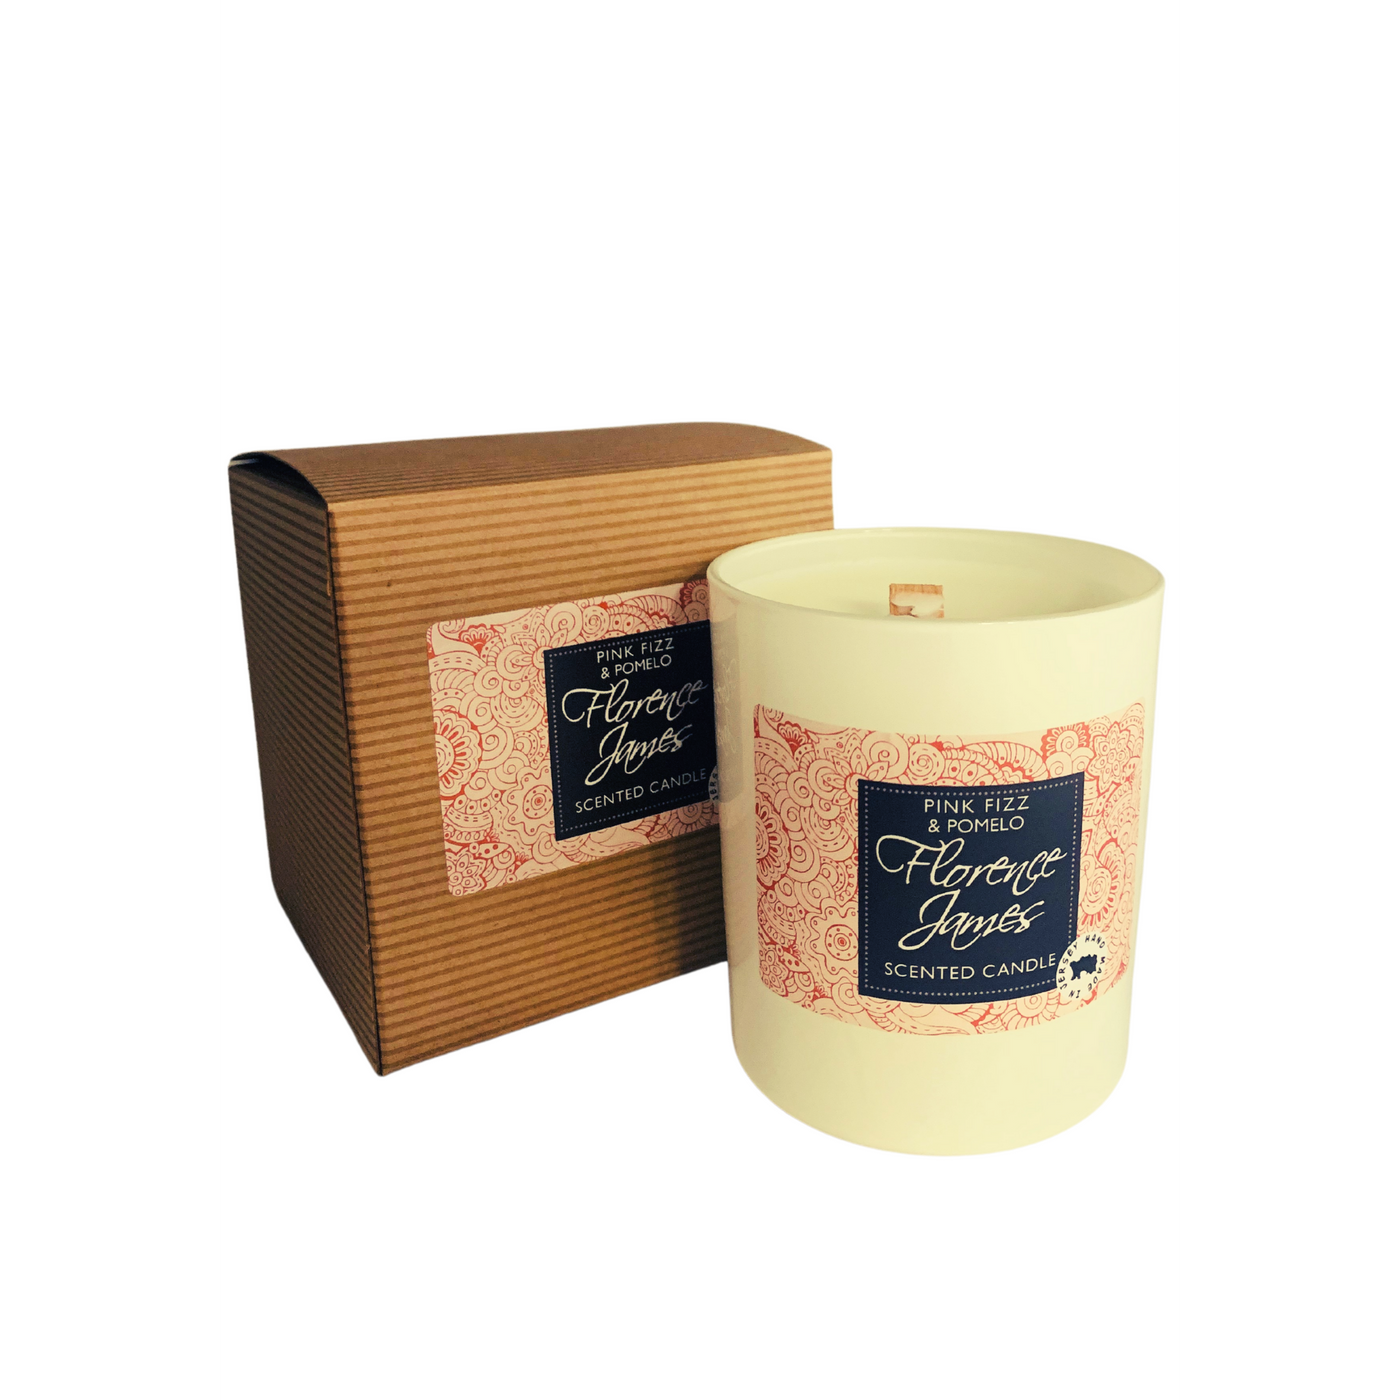 Florence James Scented Candle Pink Fizz & Pomelo